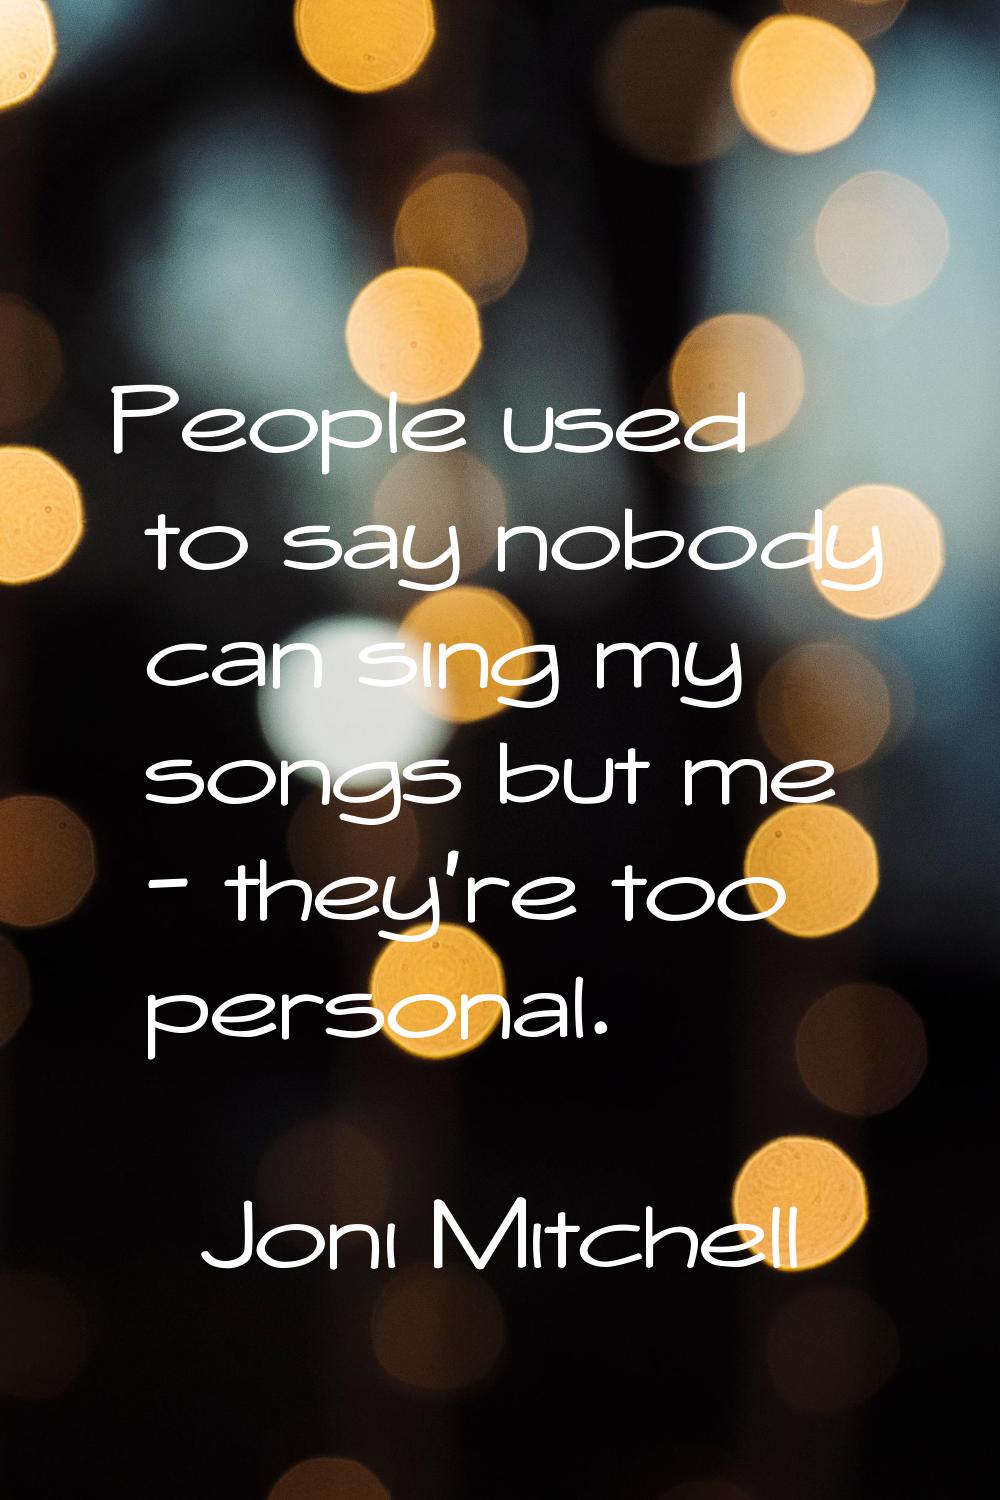 People used to say nobody can sing my songs but me - they're too personal.